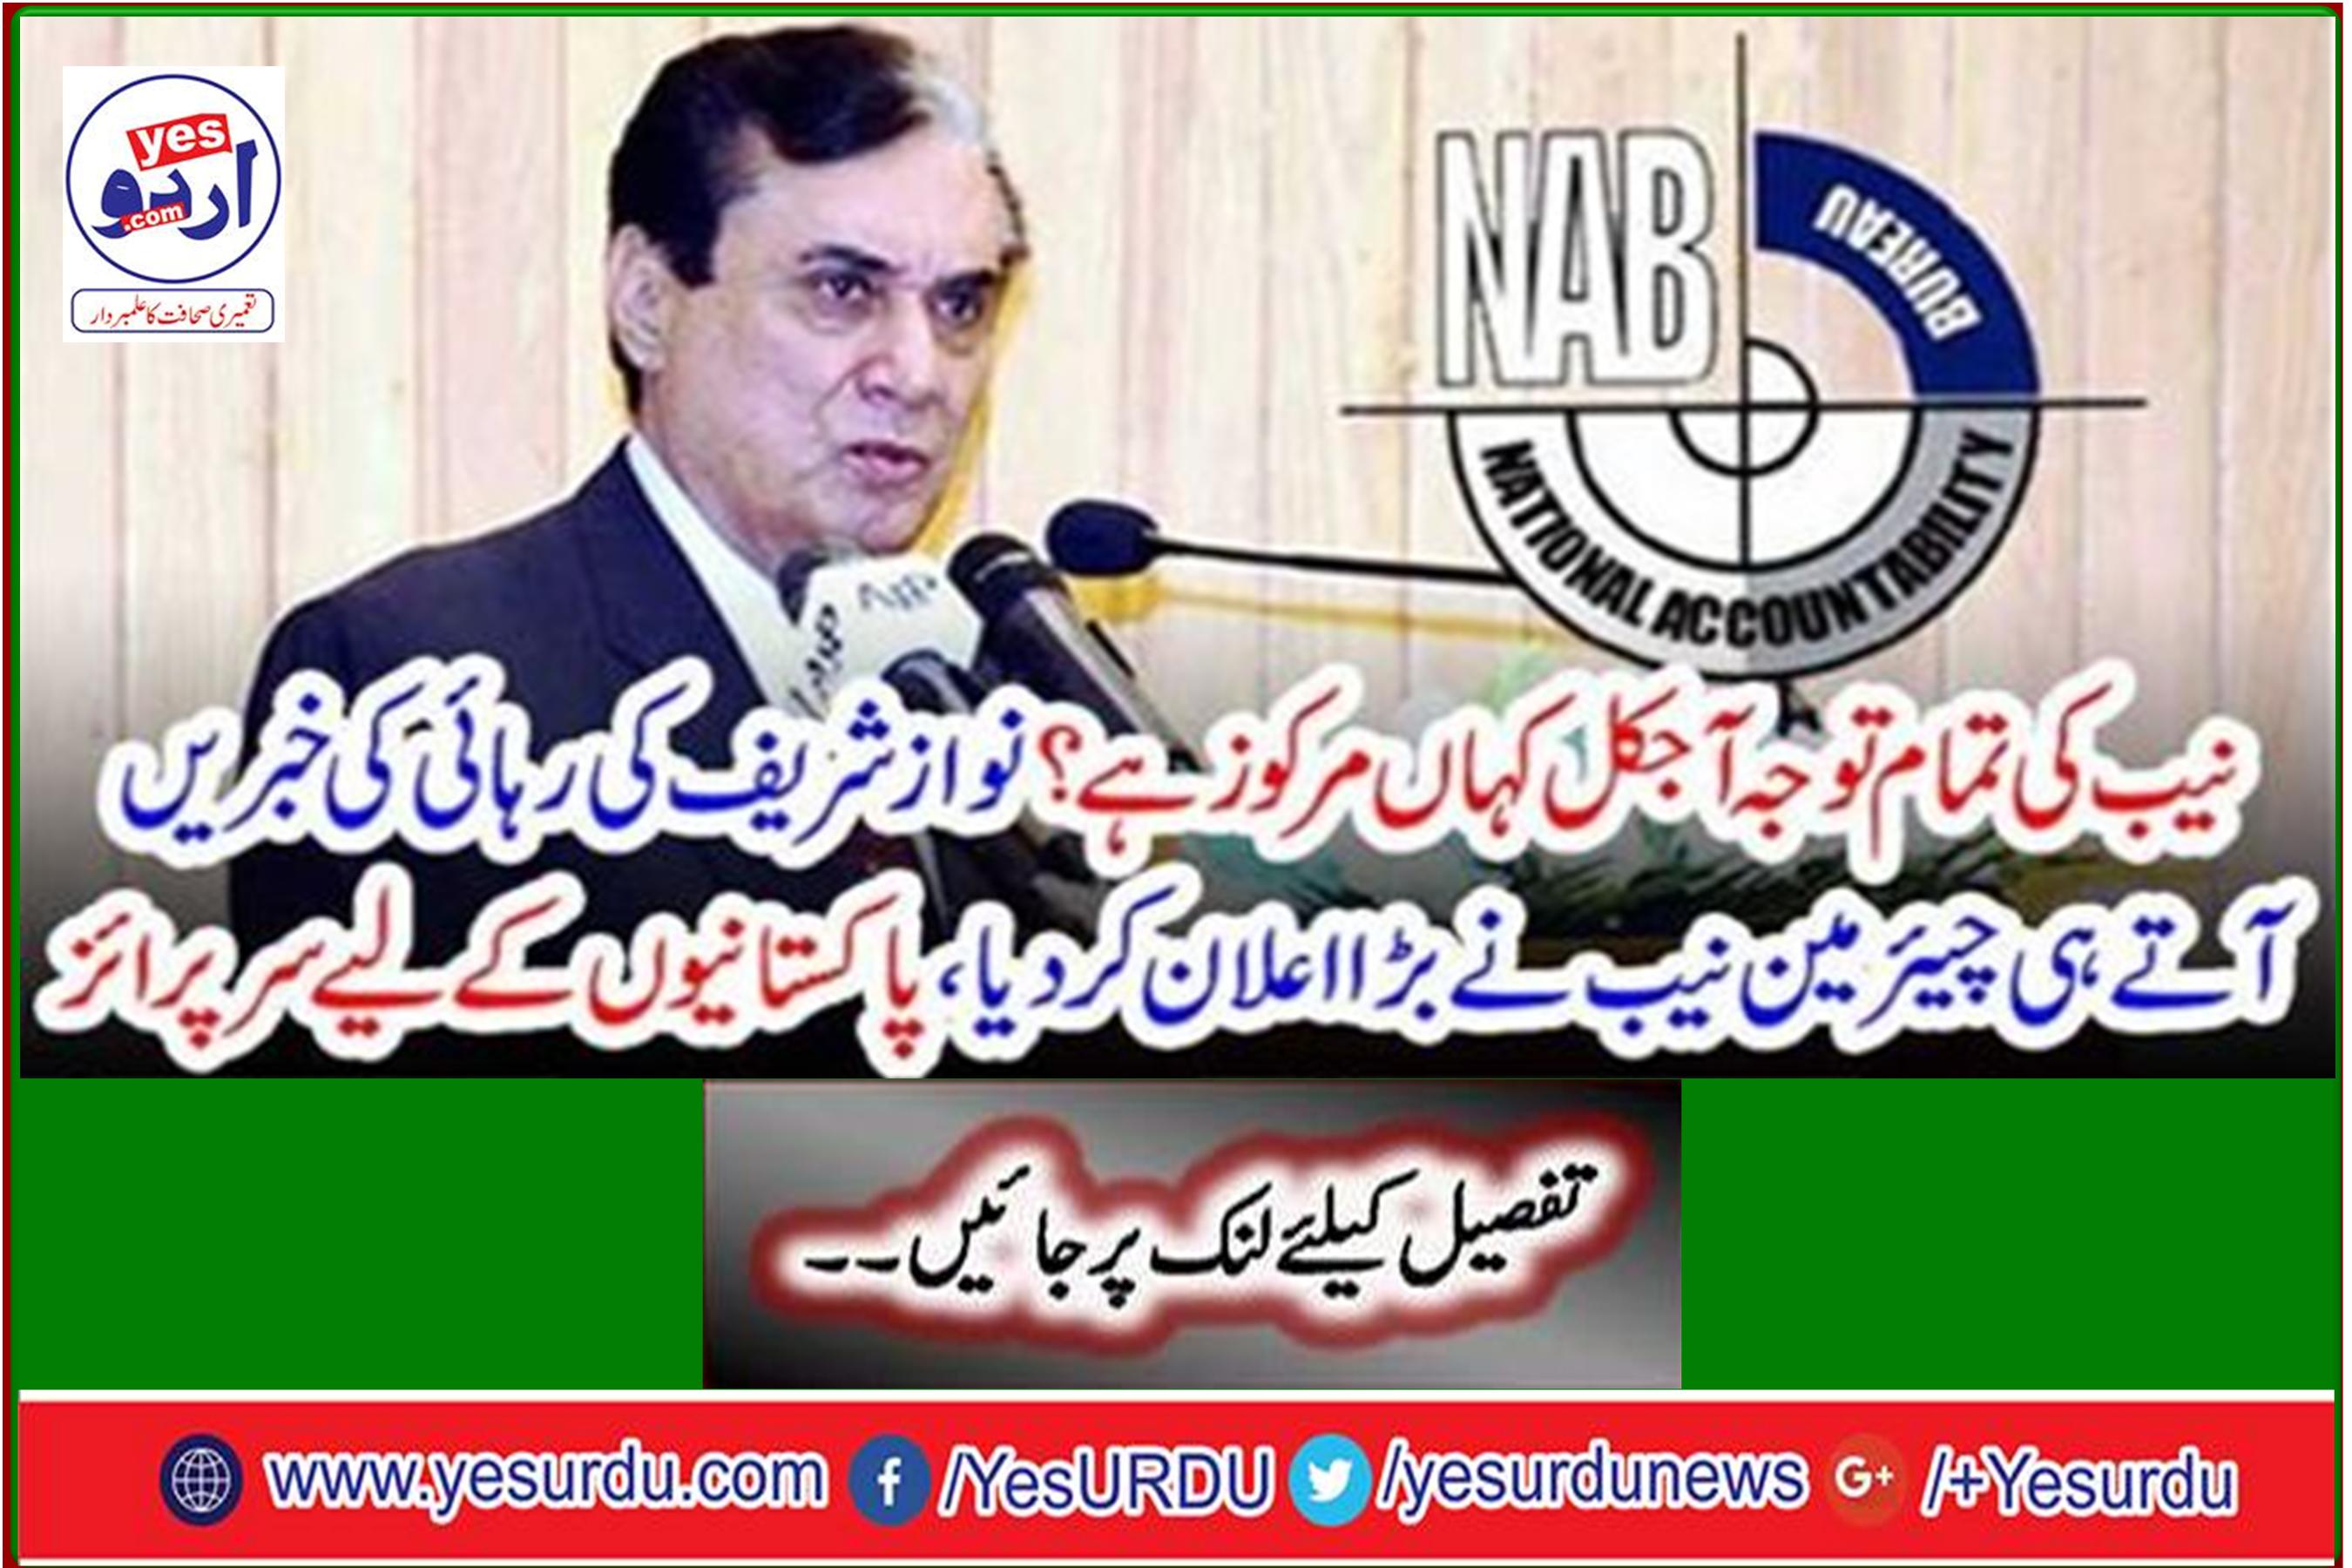 Chairman NAB announces big news after news of Nawaz Sharif's release: Surprise for Pakistanis